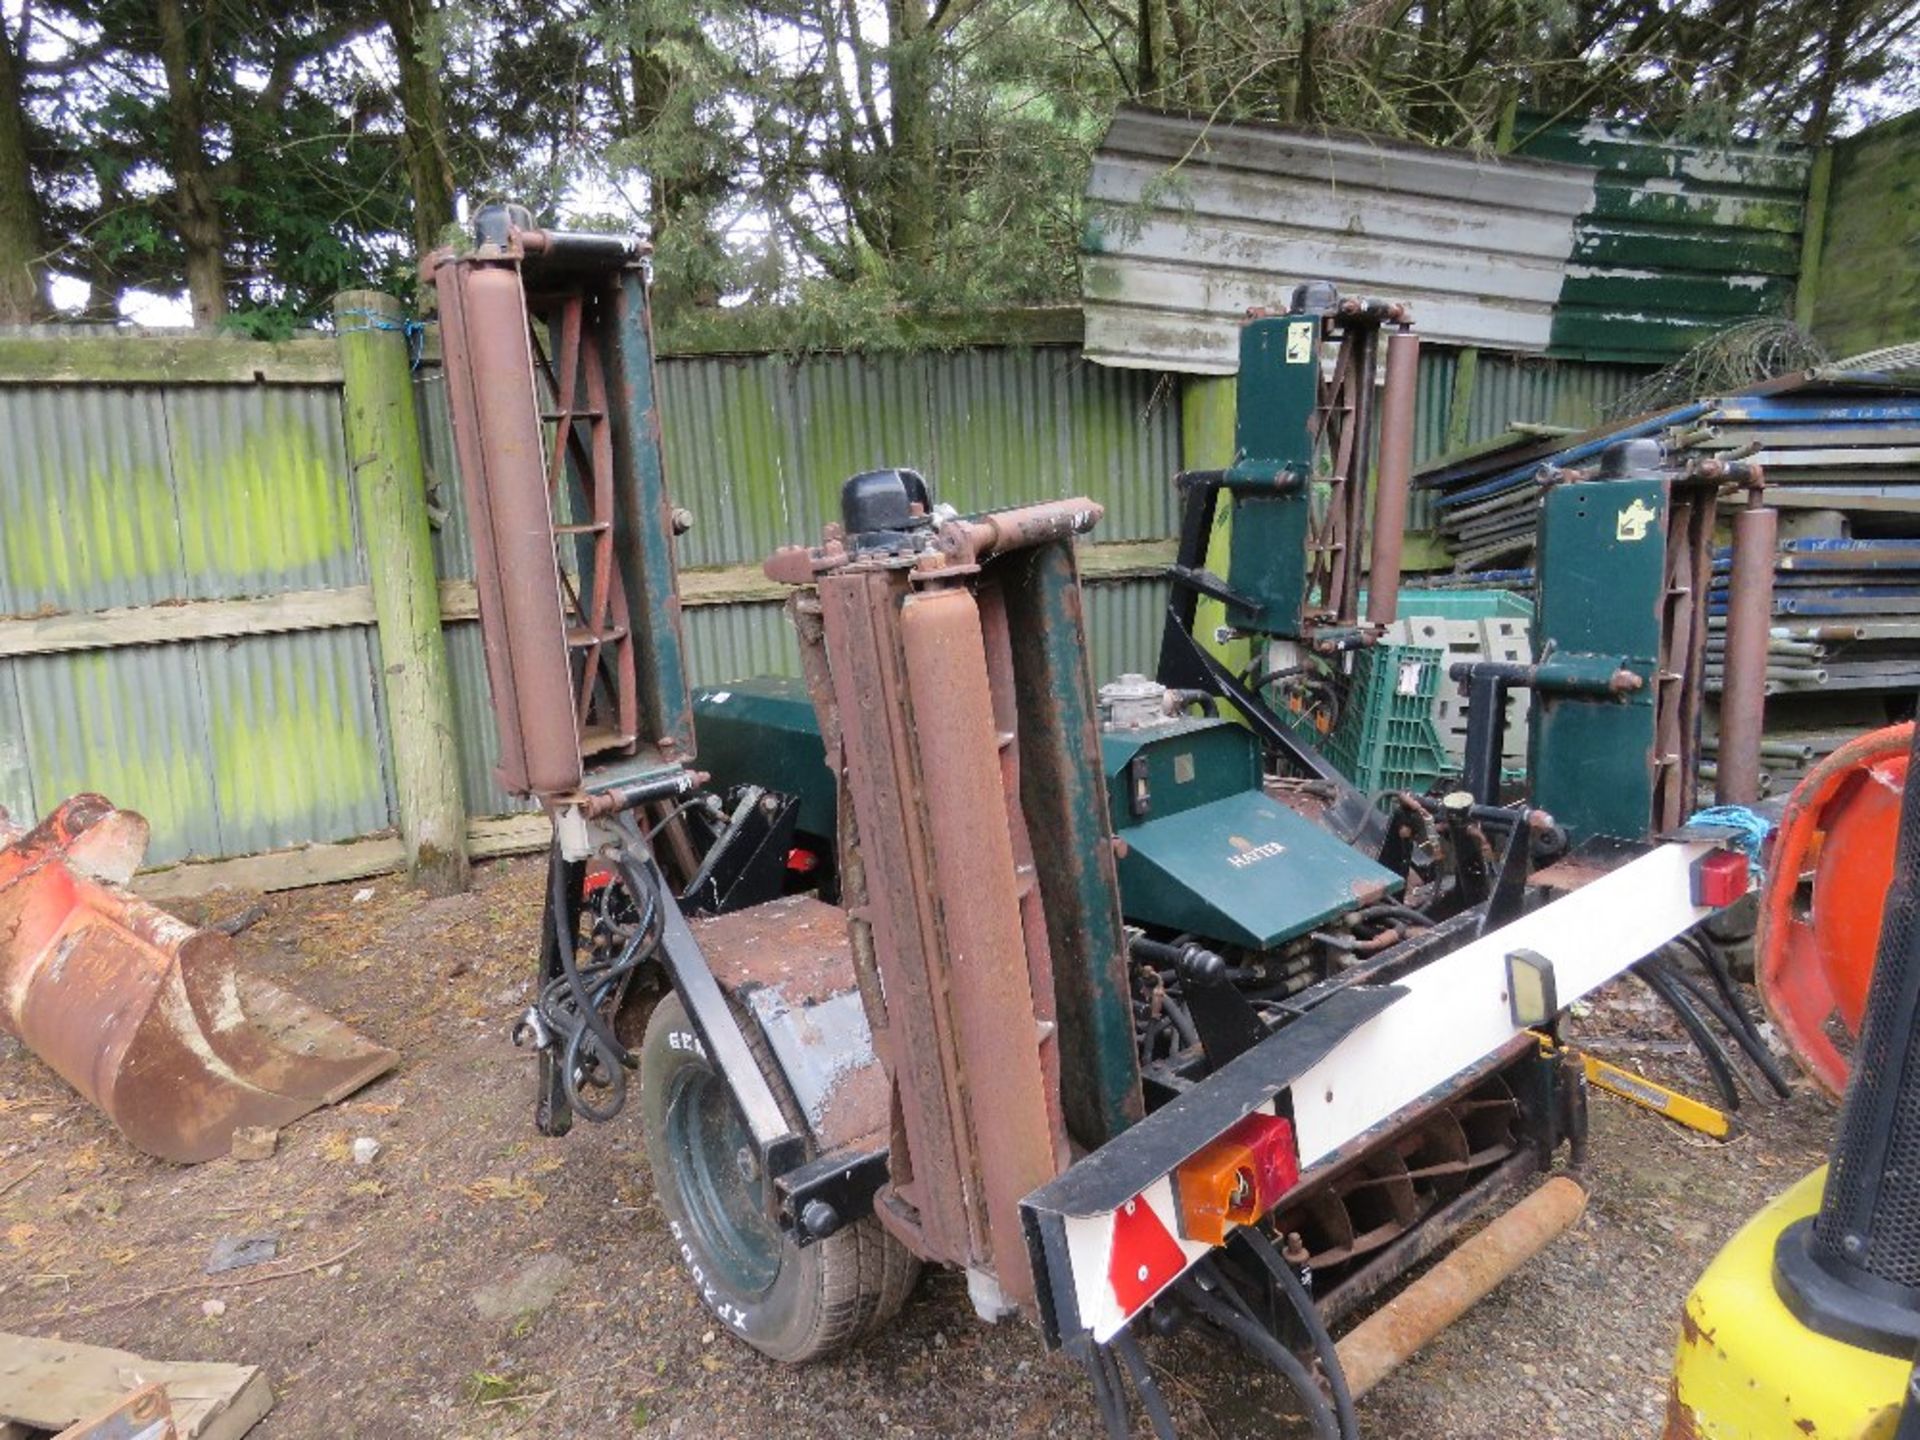 HAYTER TM729 TOWED GHAYTER TM729 TOWED G HAYTER TM729 TOWED GANG MOWER SET, PREVIOUS COUNCIL USEAGE. - Image 2 of 6